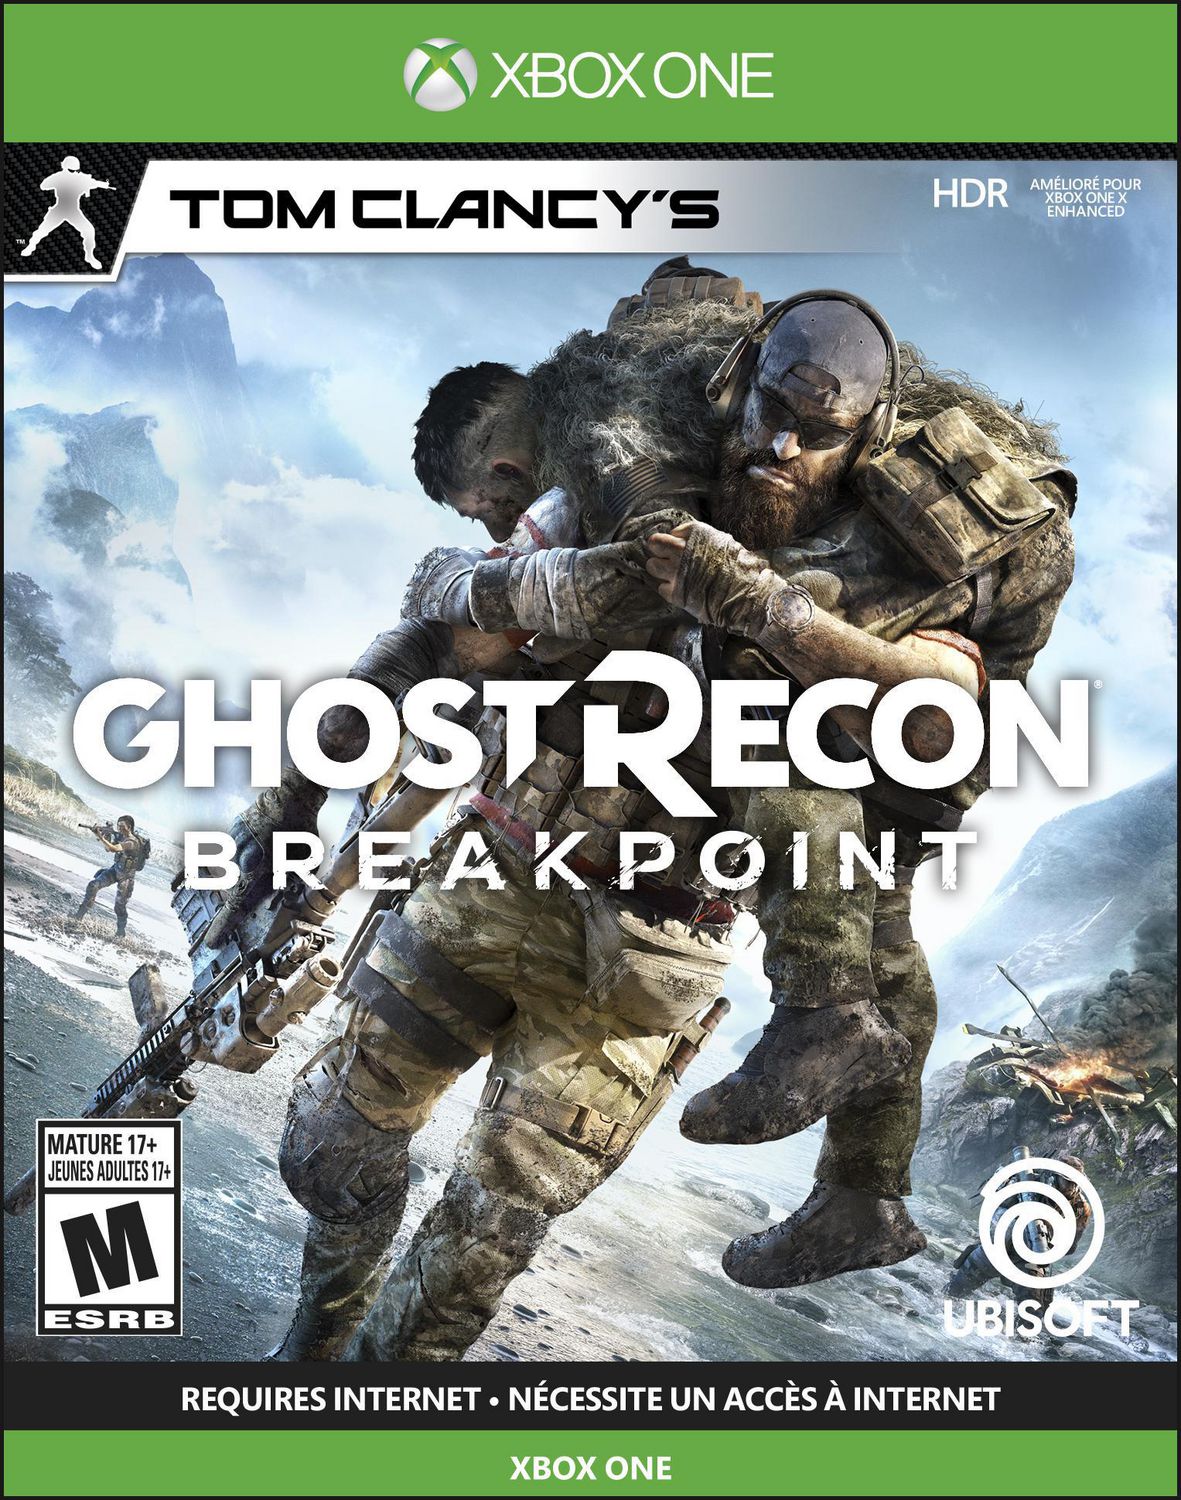 ghost recon 1 release date